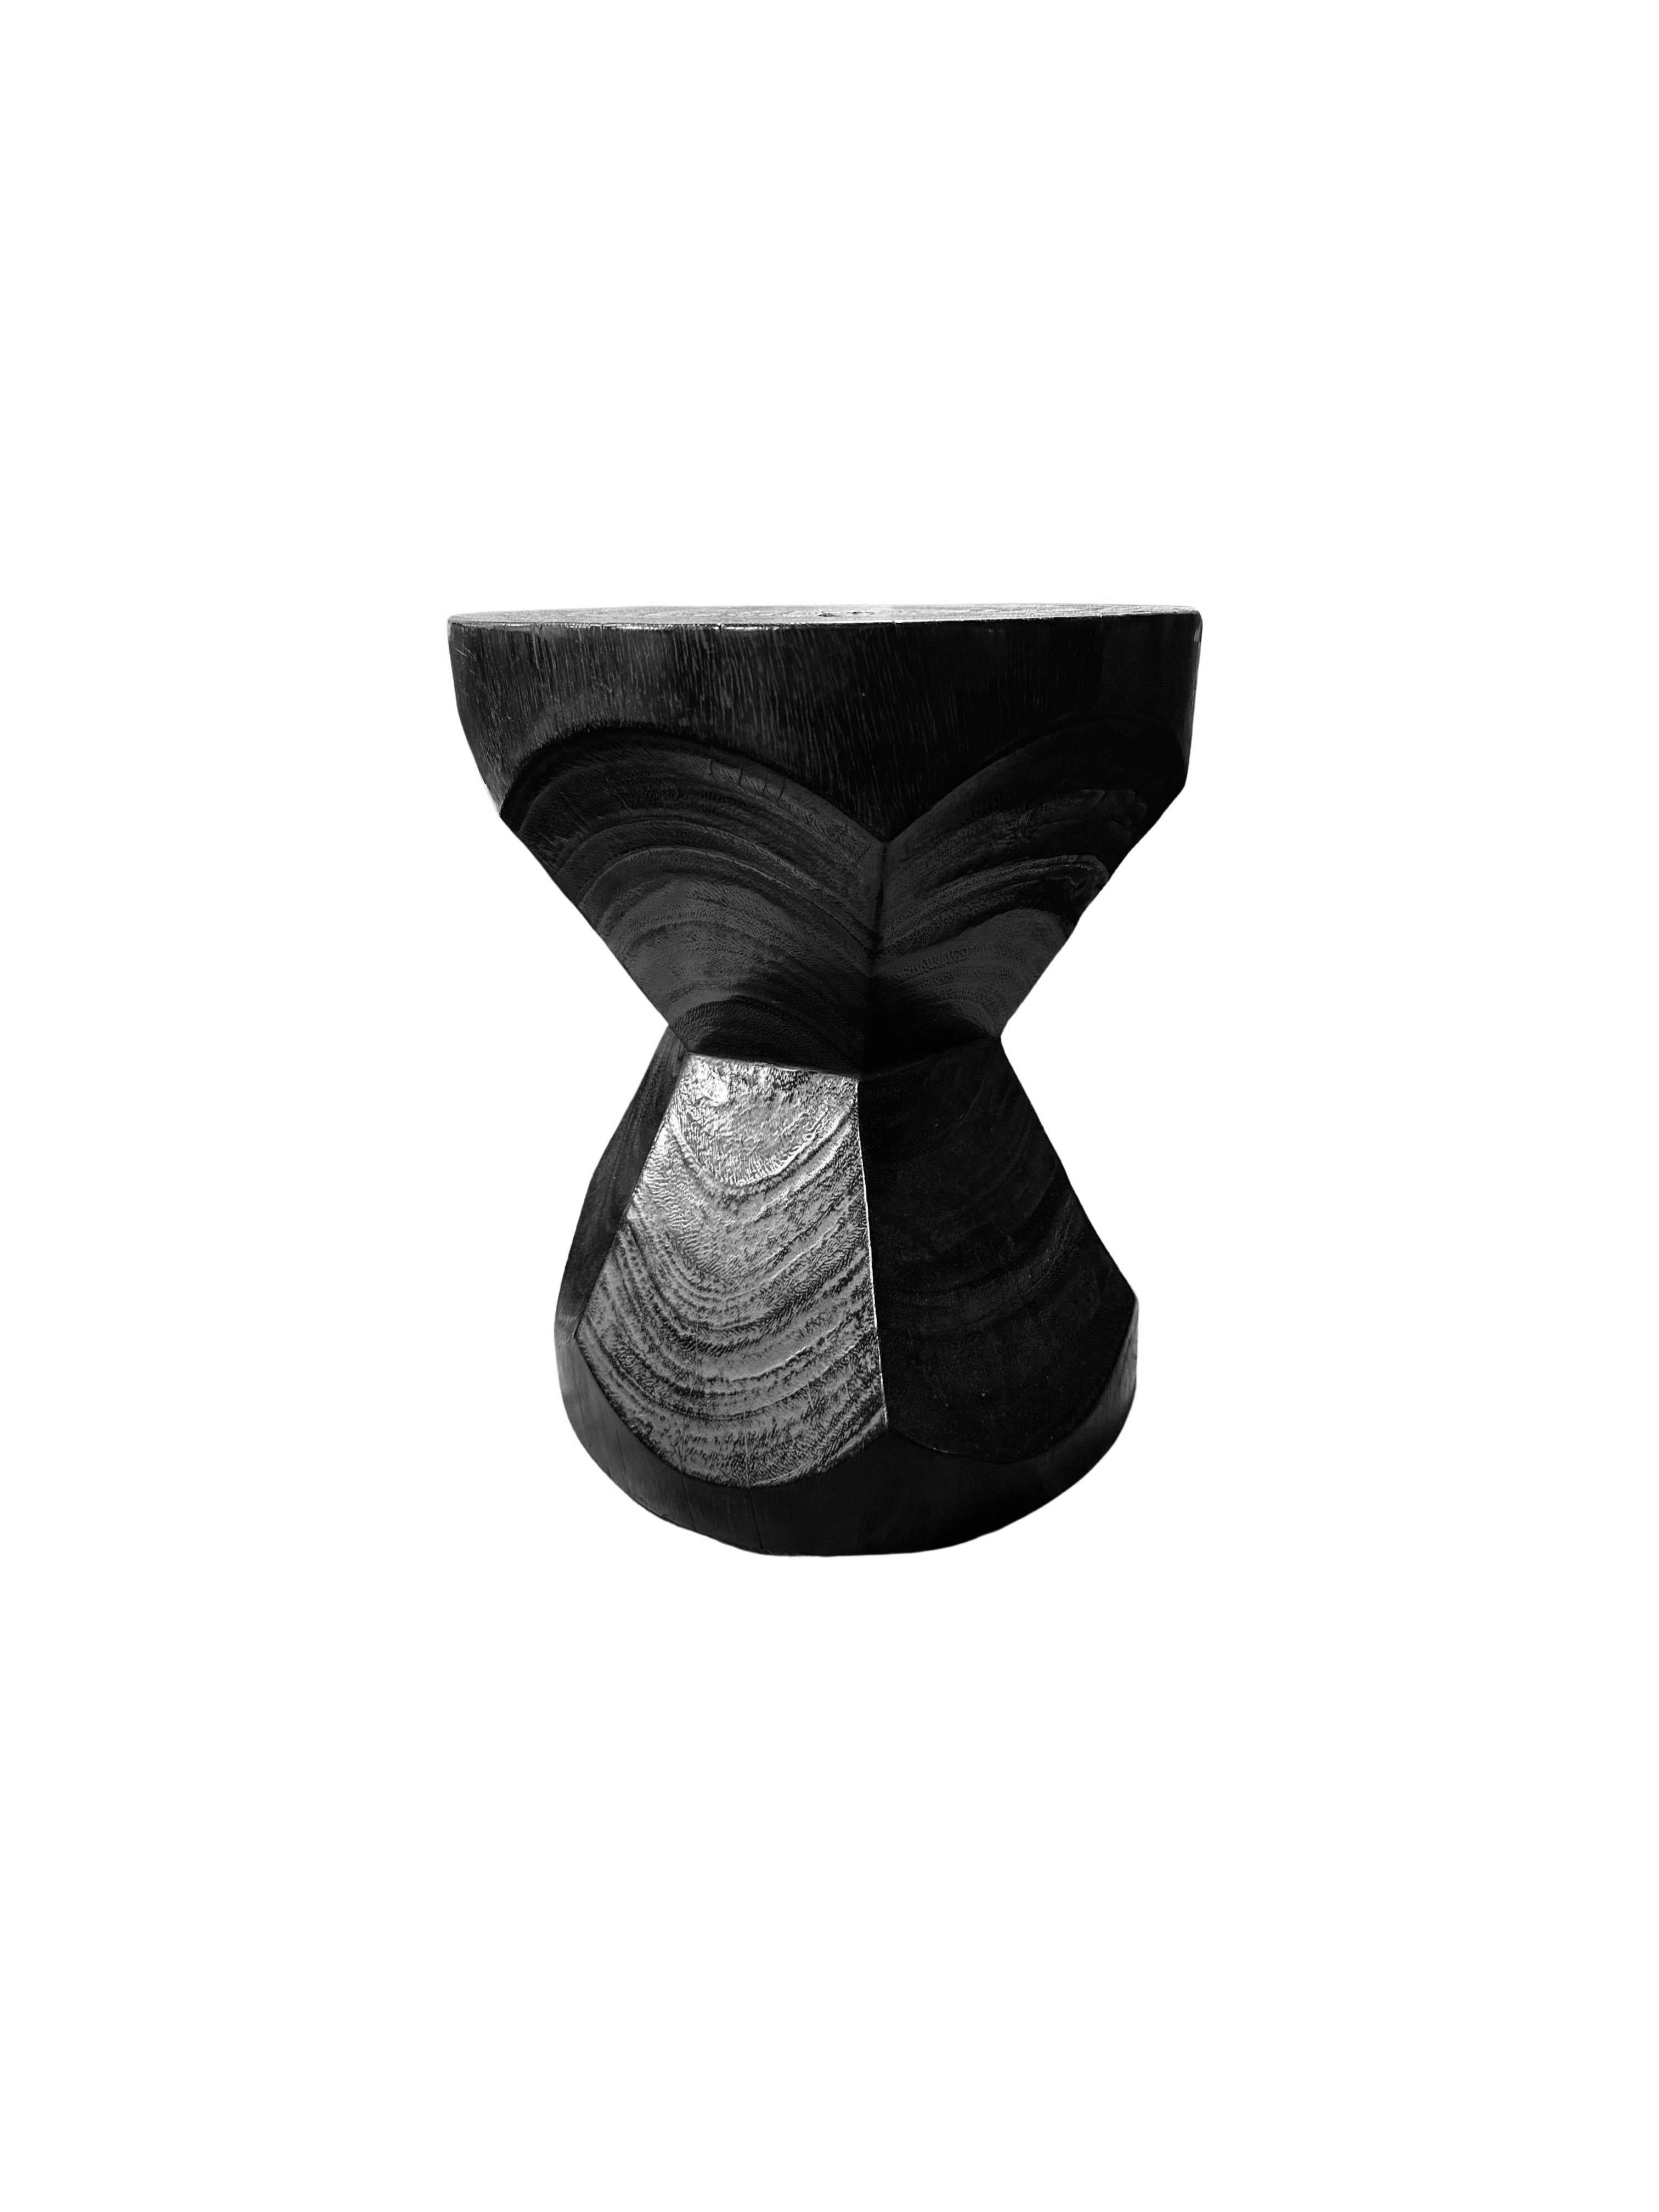 A wonderfully sculptural round side table. Its neutral pigments make it perfect for any space. It was crafted from a solid block of mango wood and features an elegant mix of curved and straight lines. To achieve its black color the wood was burnt